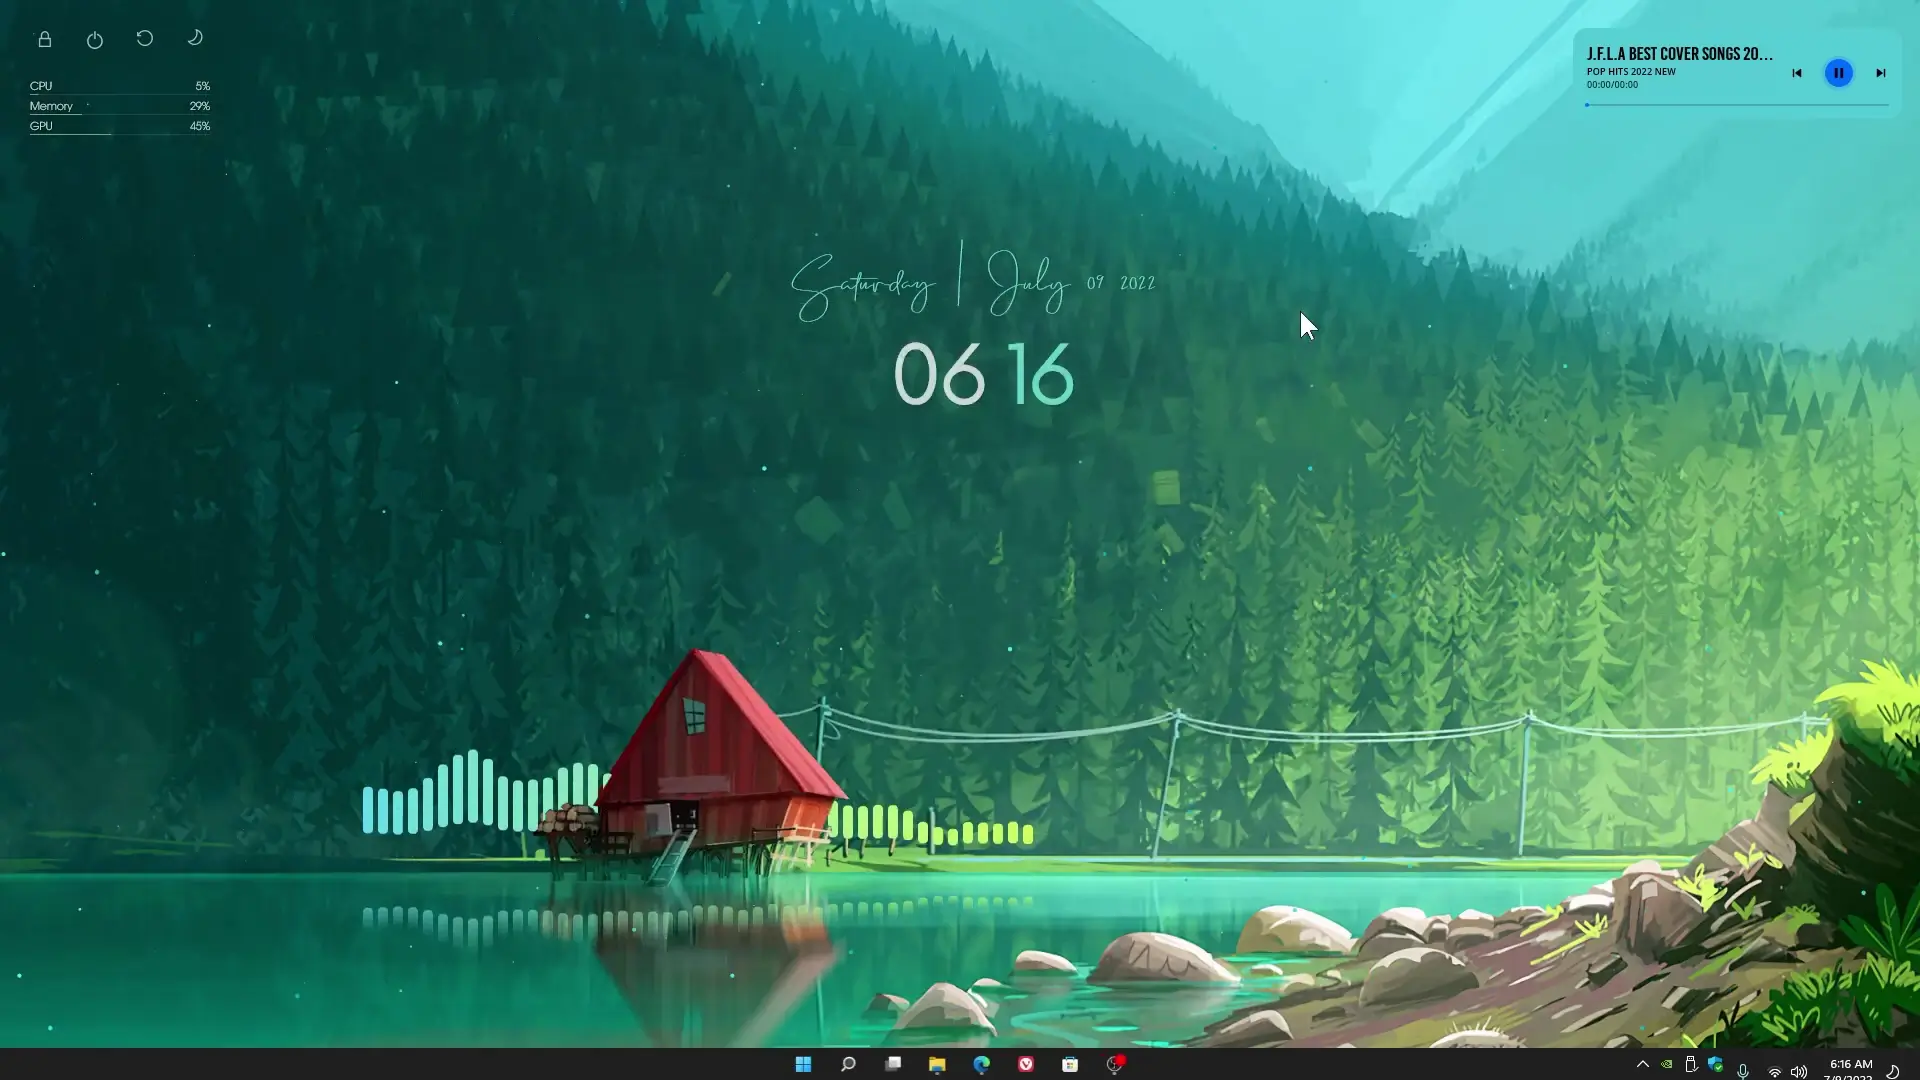 How to Make Desktop Look Awesome #12